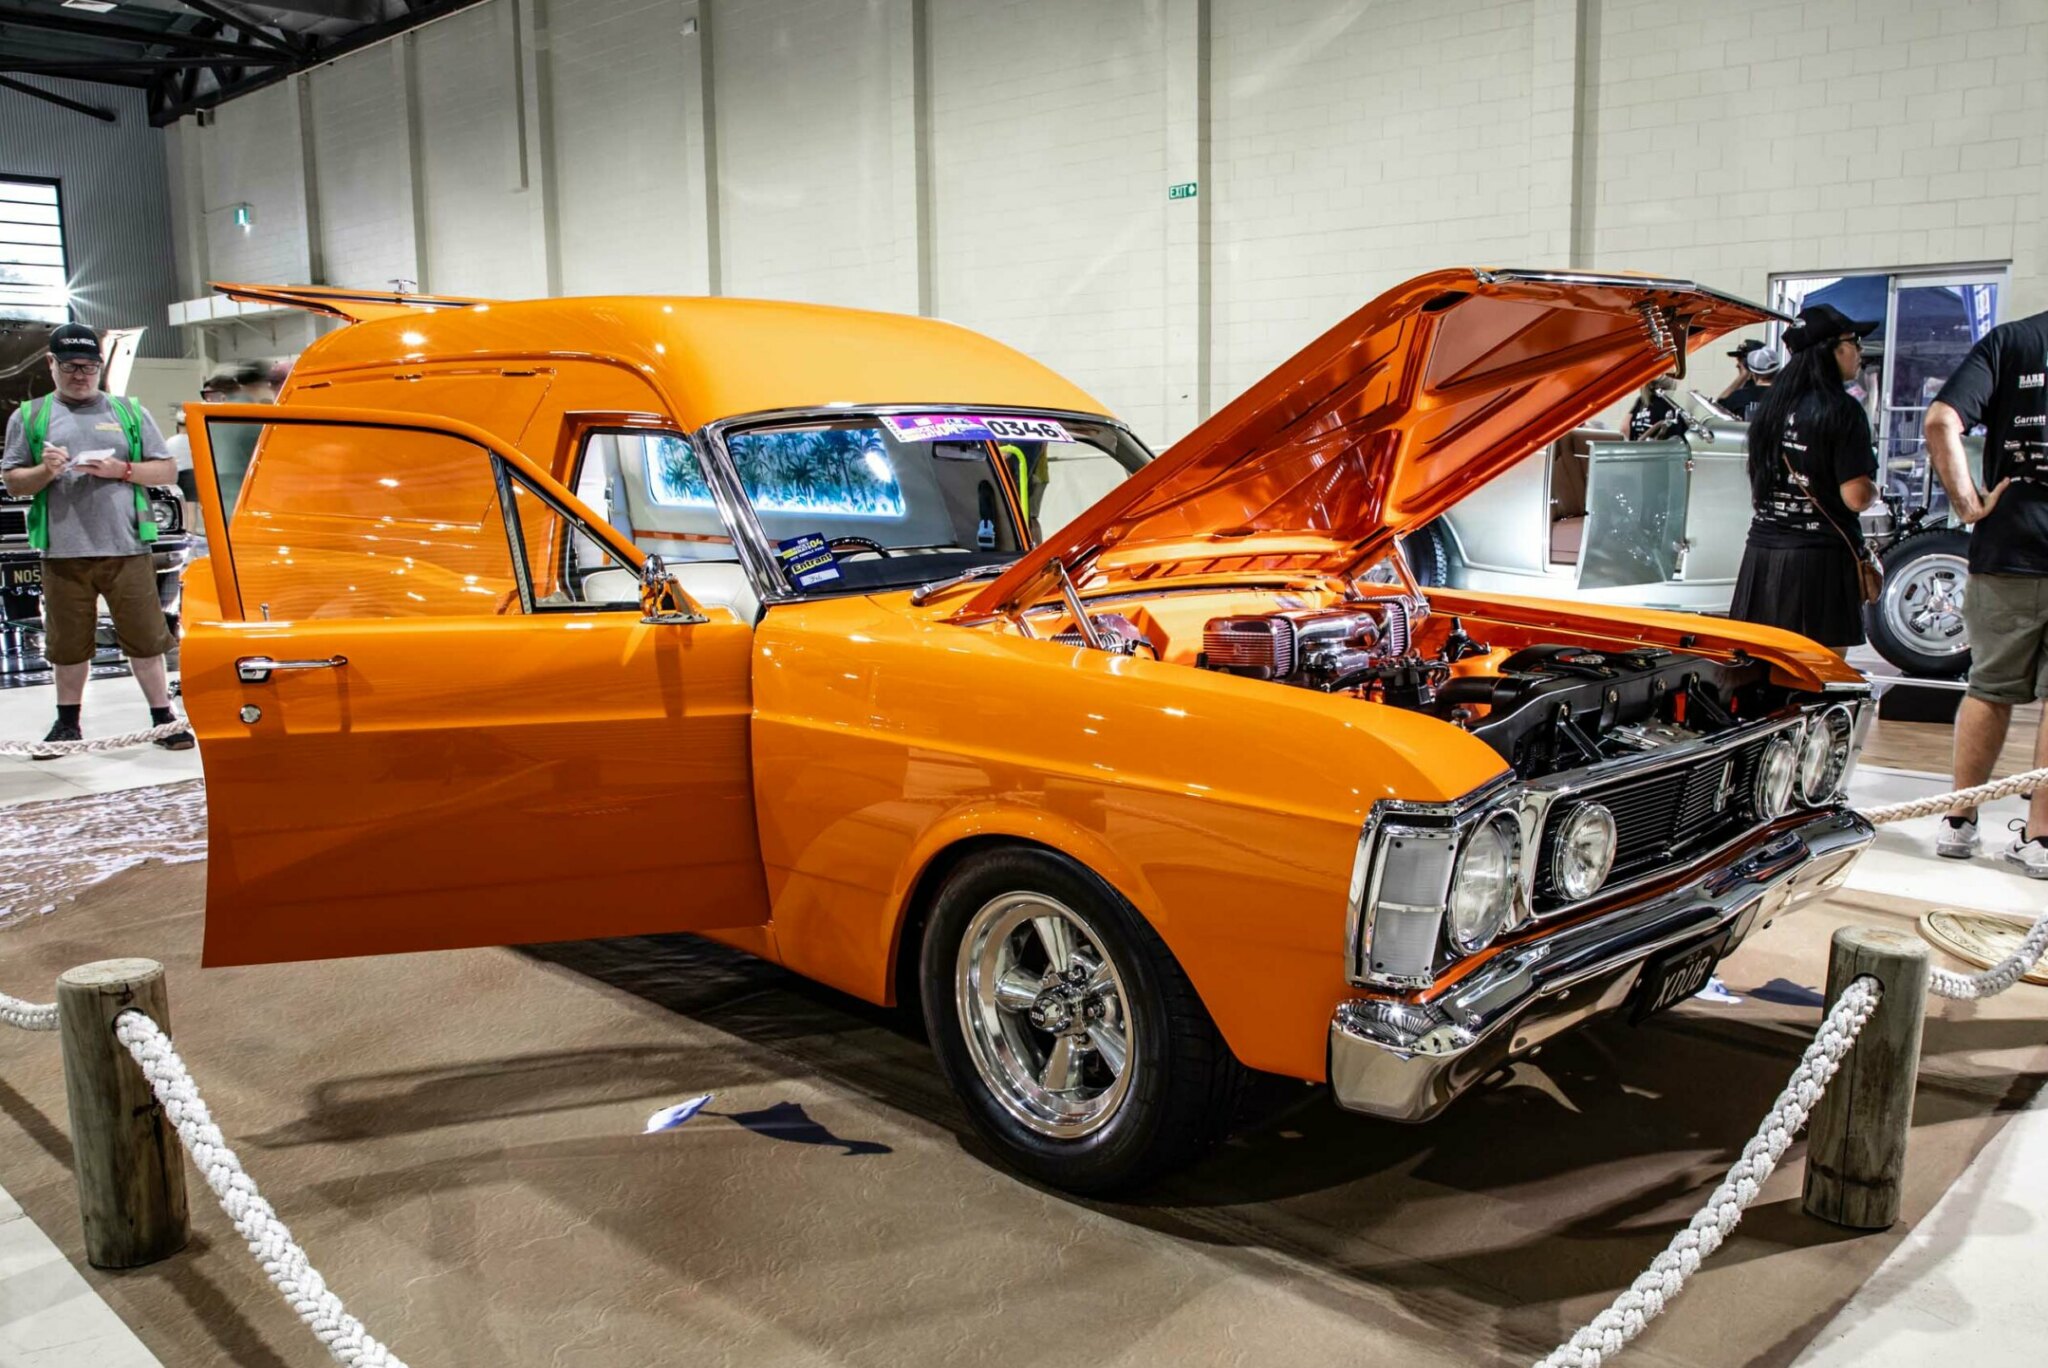 Raw Orange: The XW Ford Falcon van loaded with clever thinking